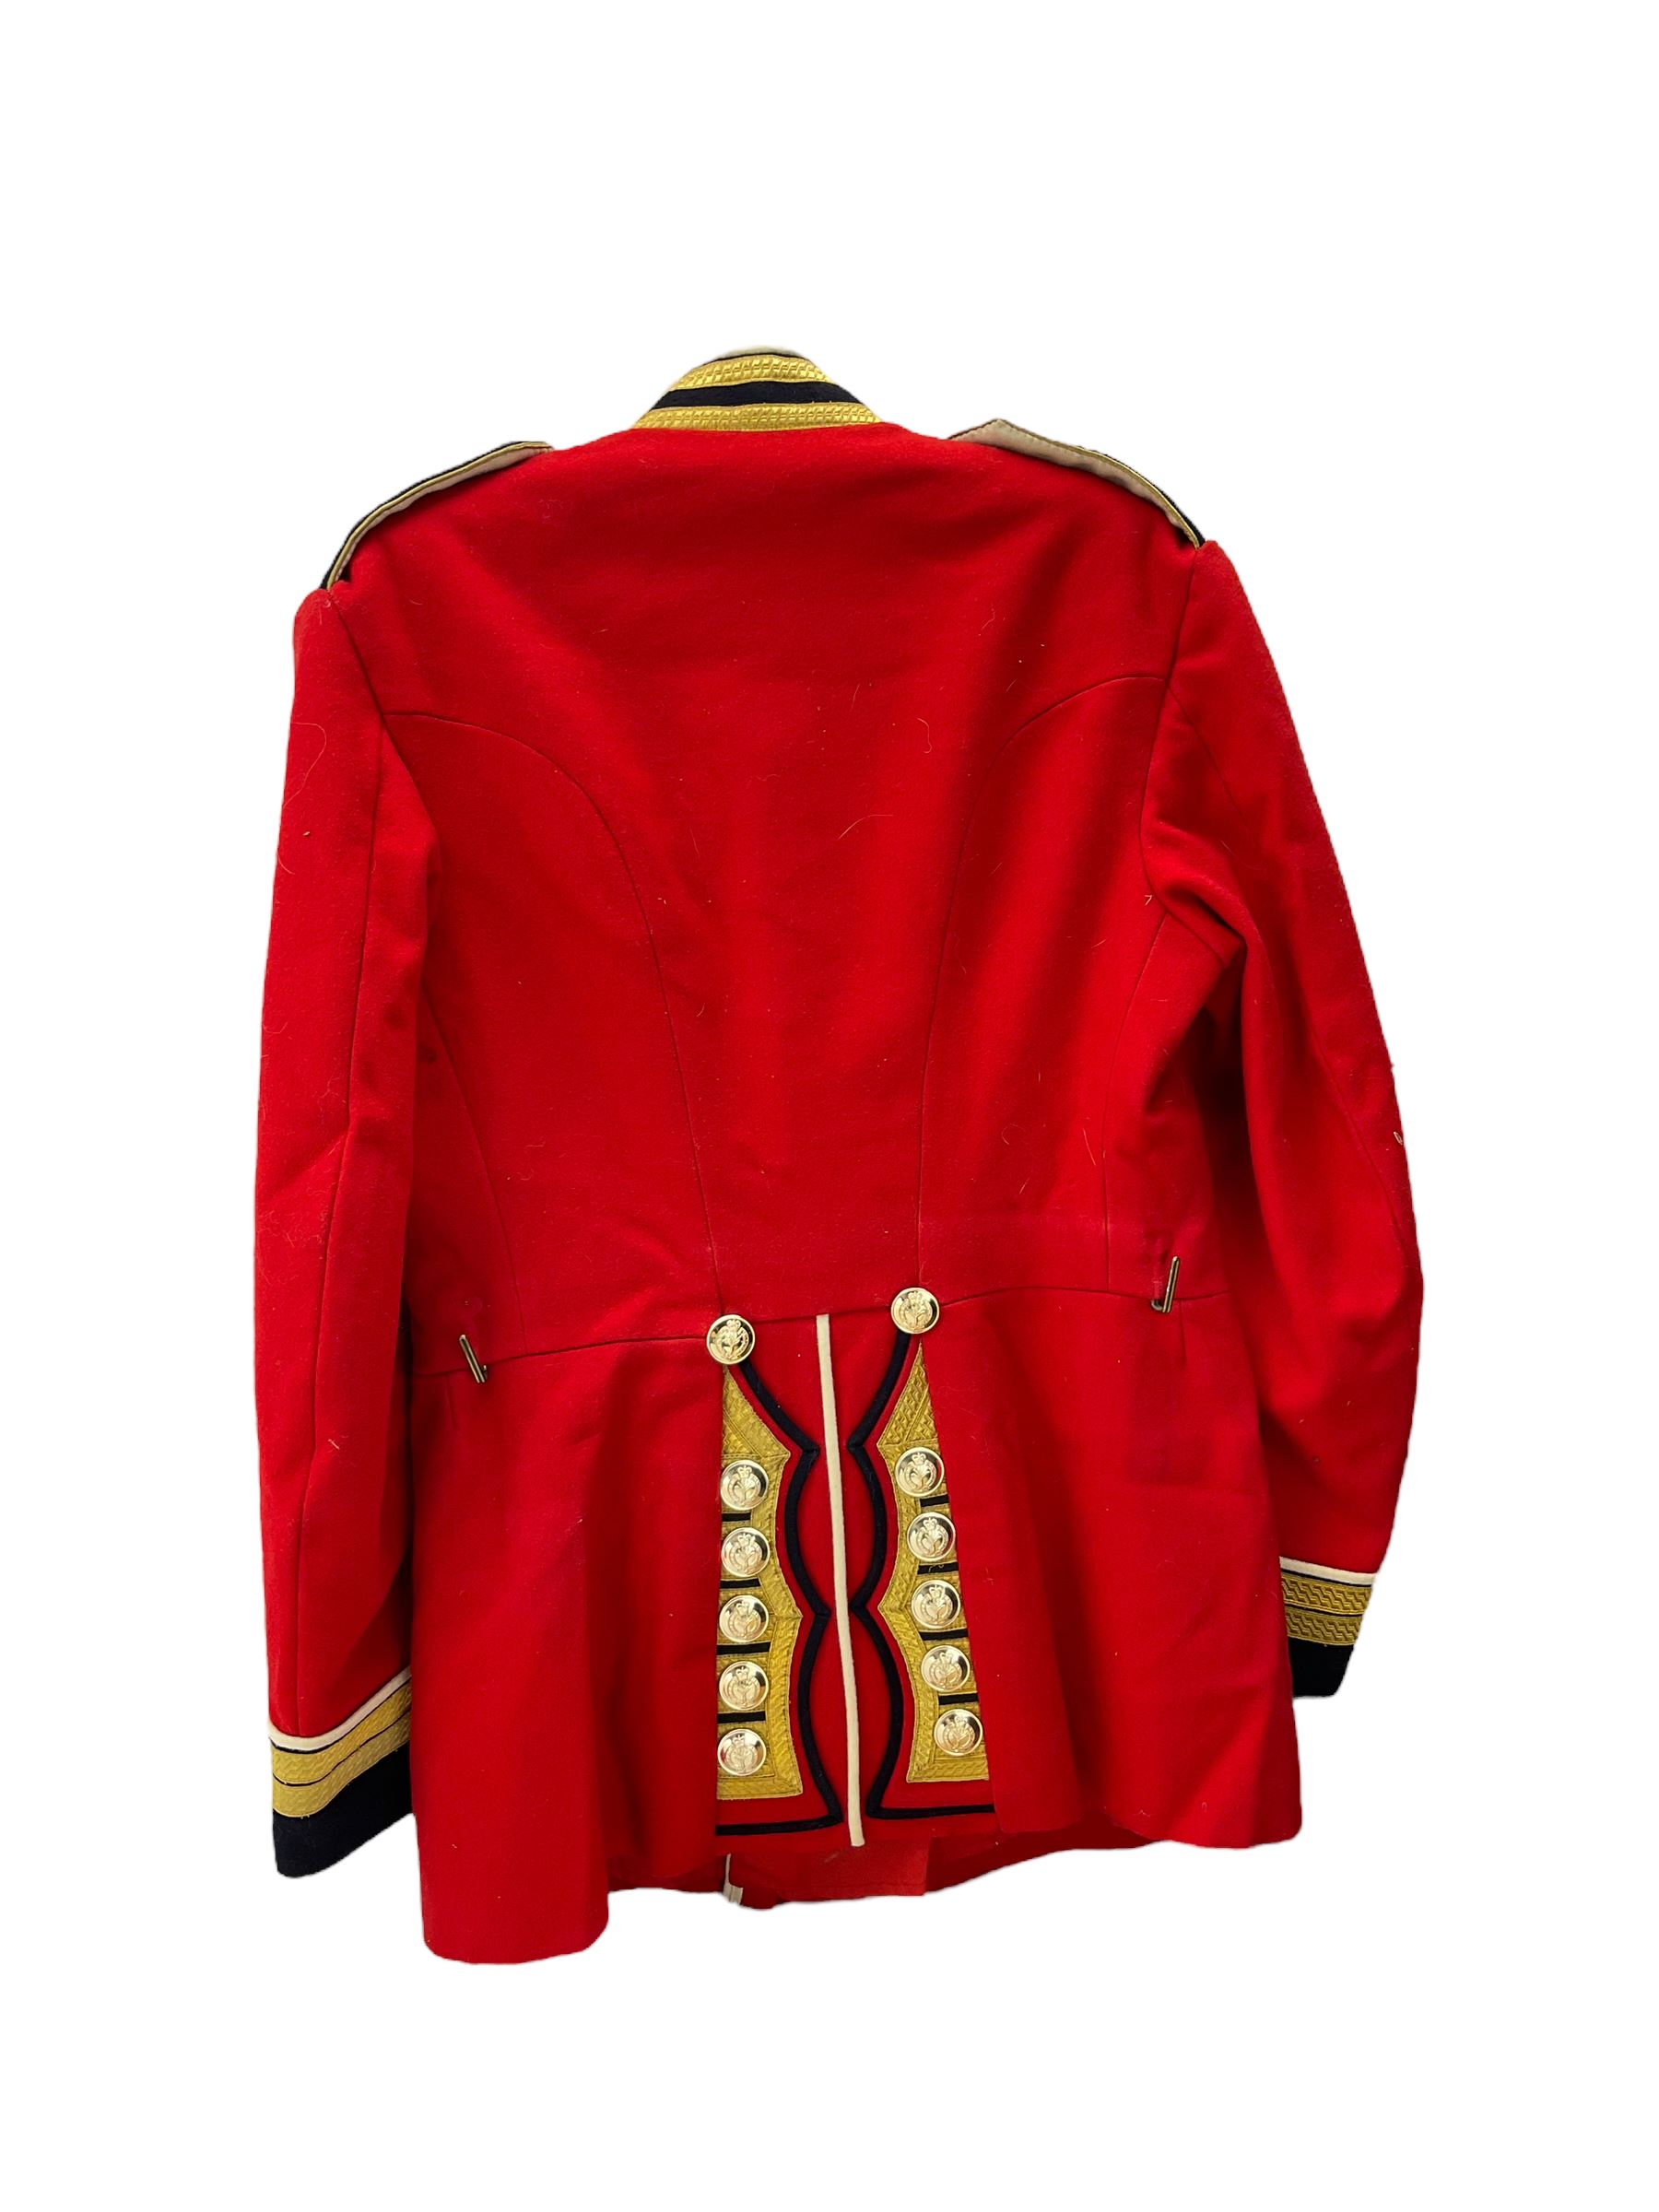 Welsh Guards dress tunic - Image 2 of 4